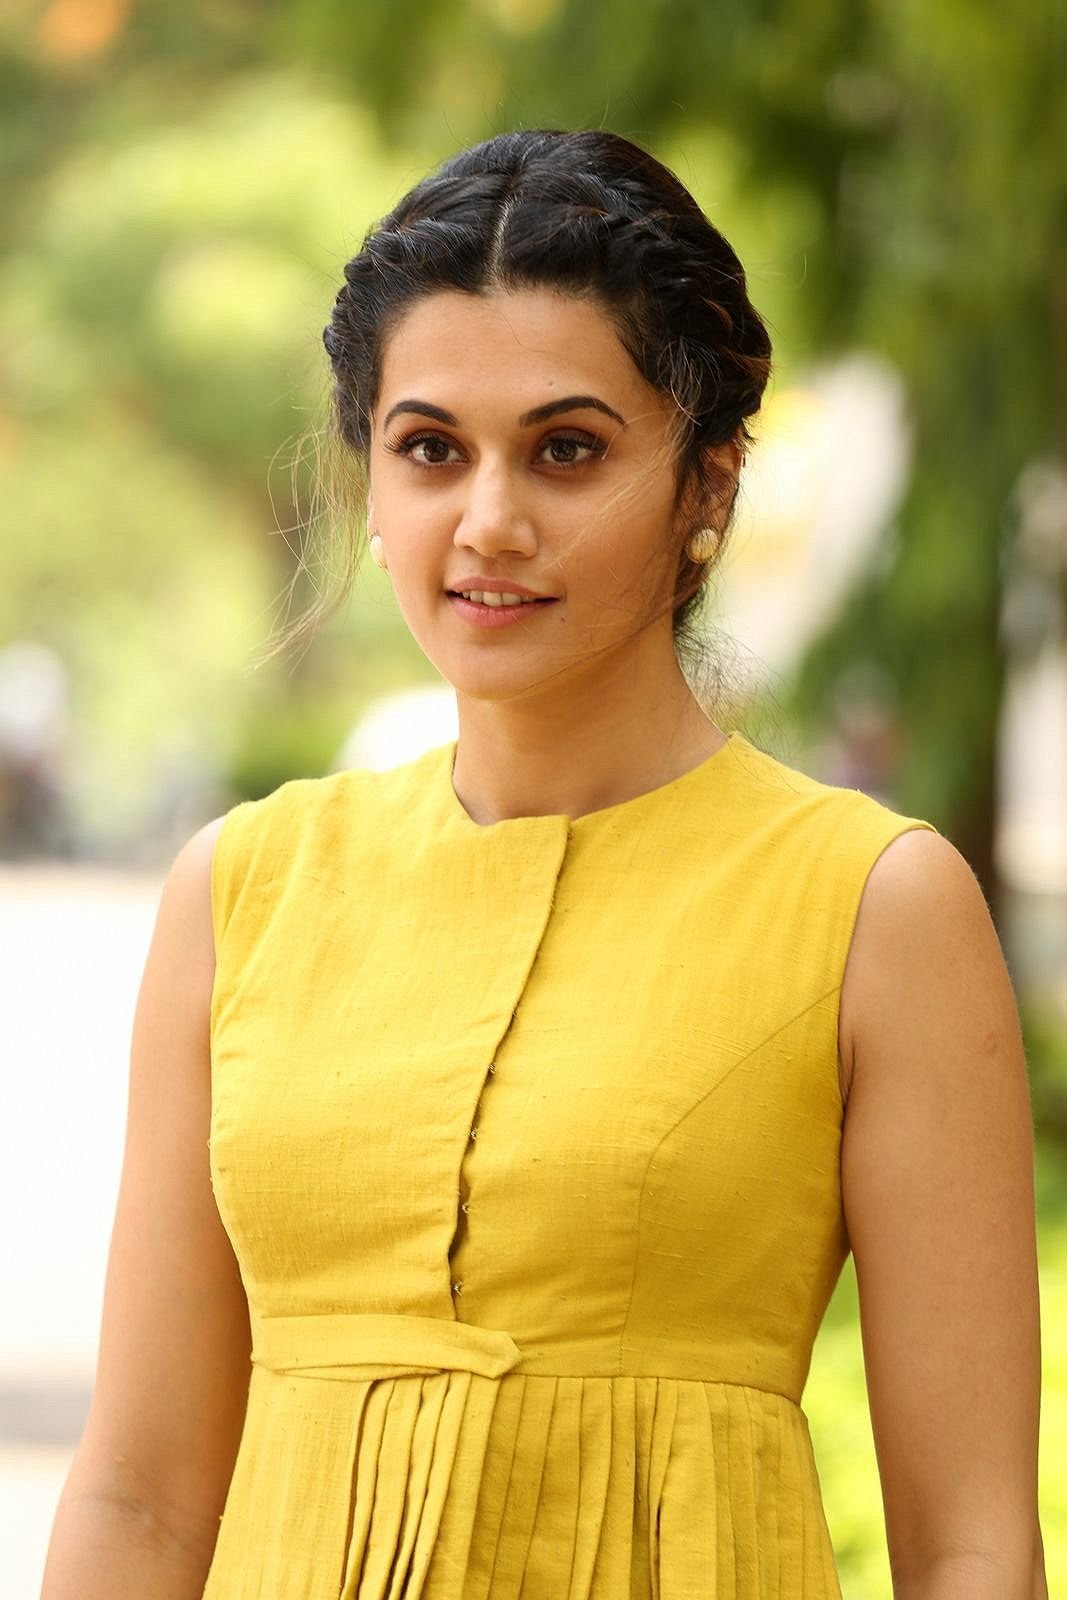 Taapsee Pannu at Anando Brahma Movie Motion Poster Launch Photos | Picture 1500630